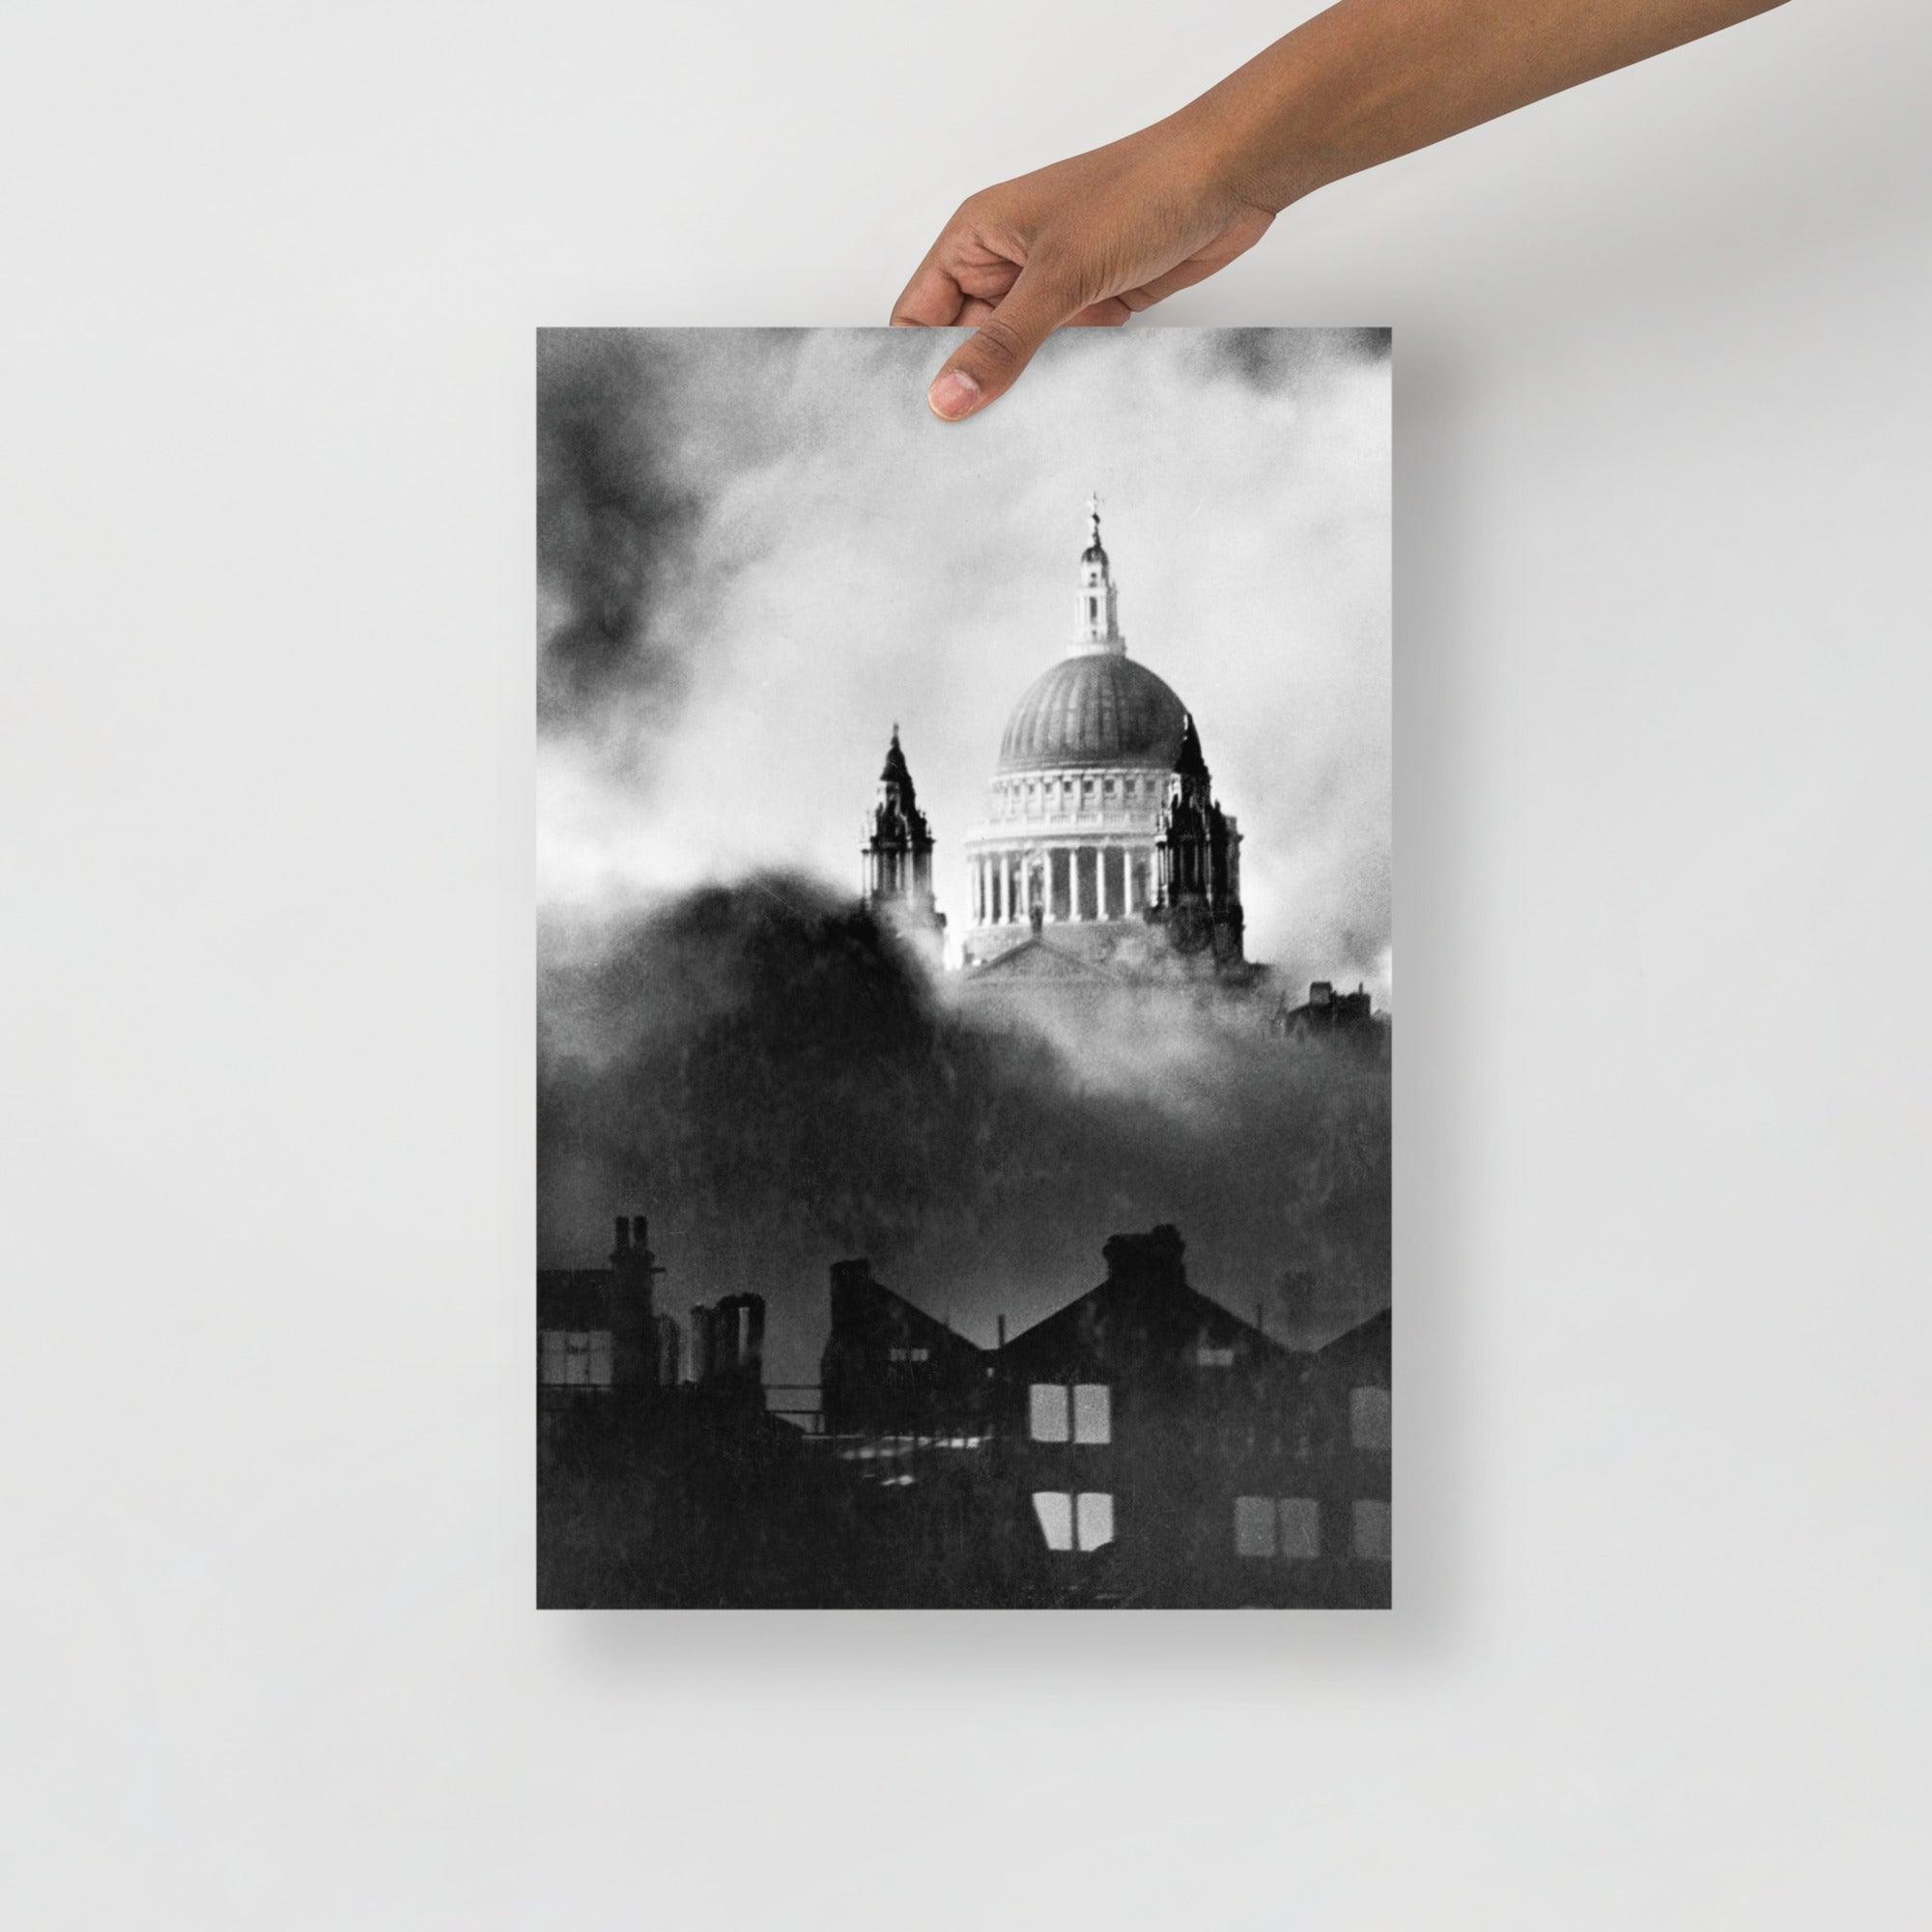 A St Paul's Survives poster on a plain backdrop in size 12x18”.